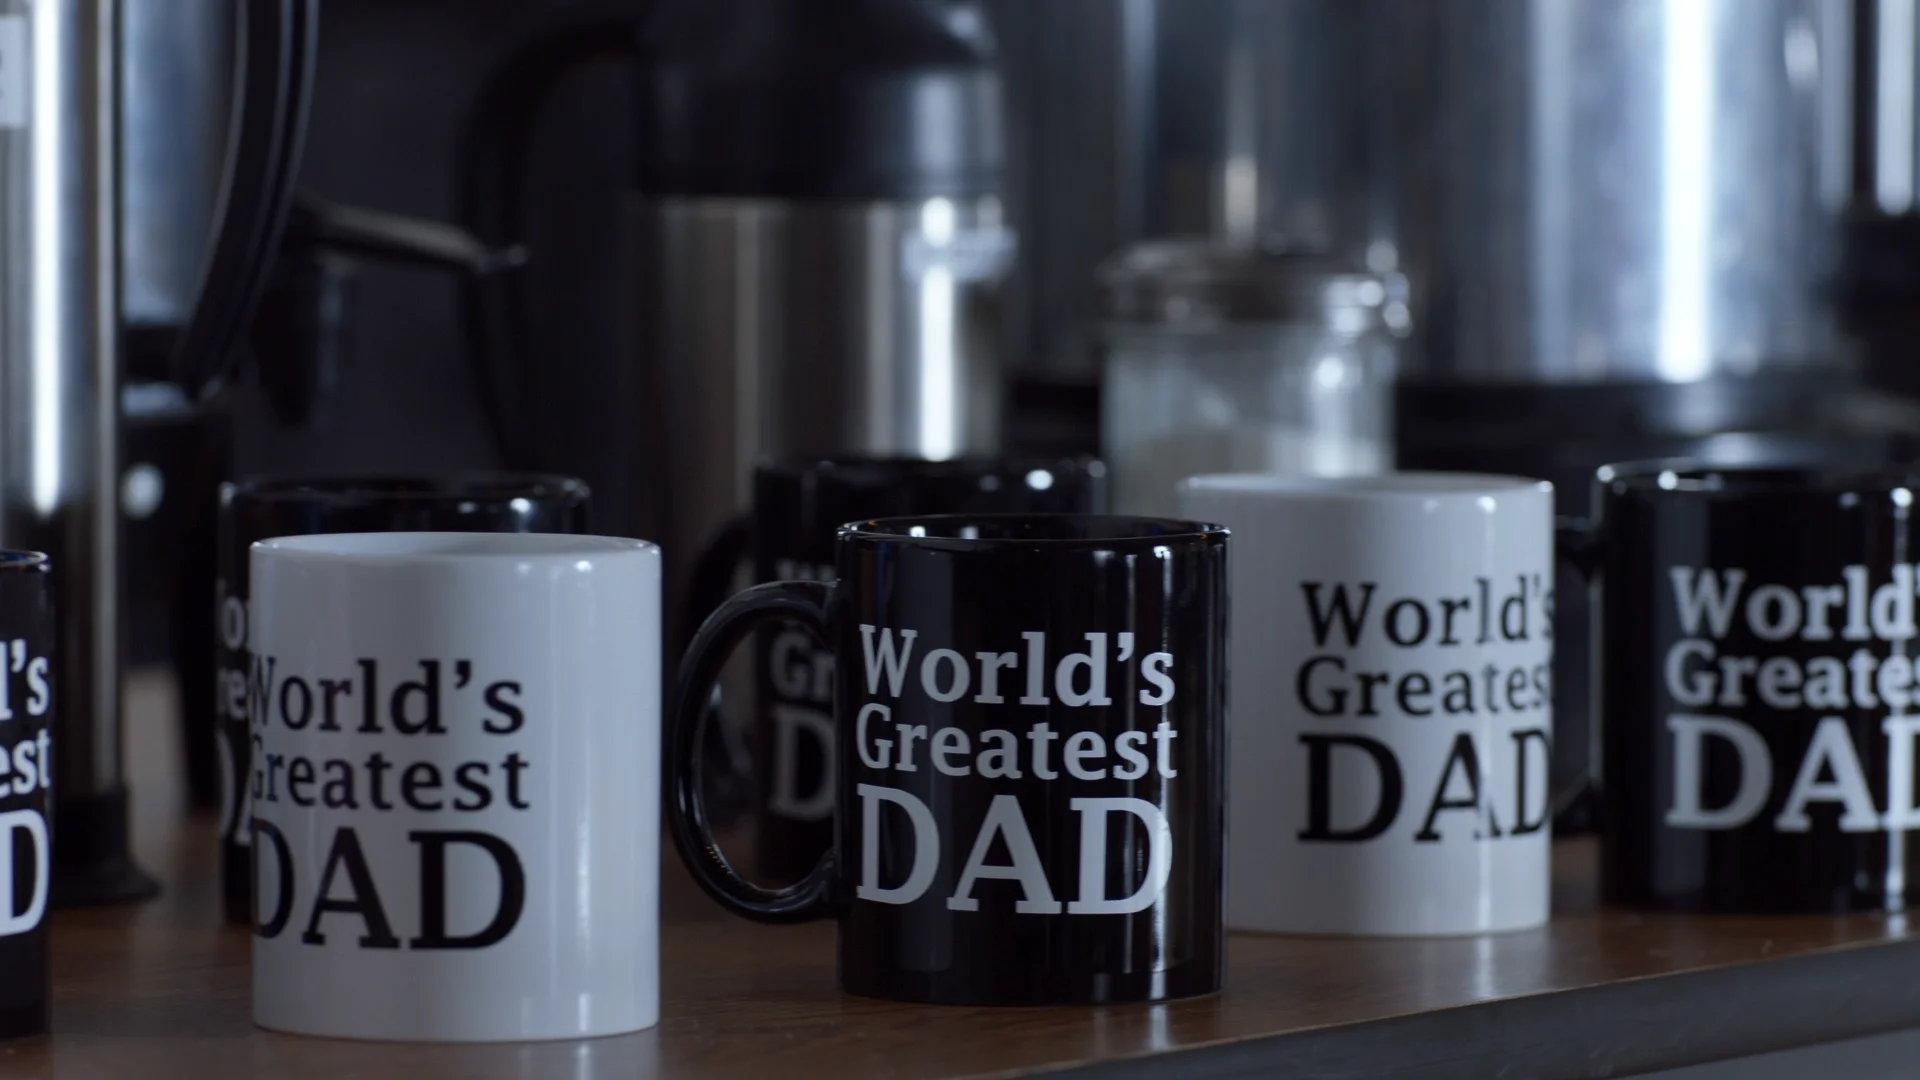 dongming wang recommends Daddy Mugs Tumblr